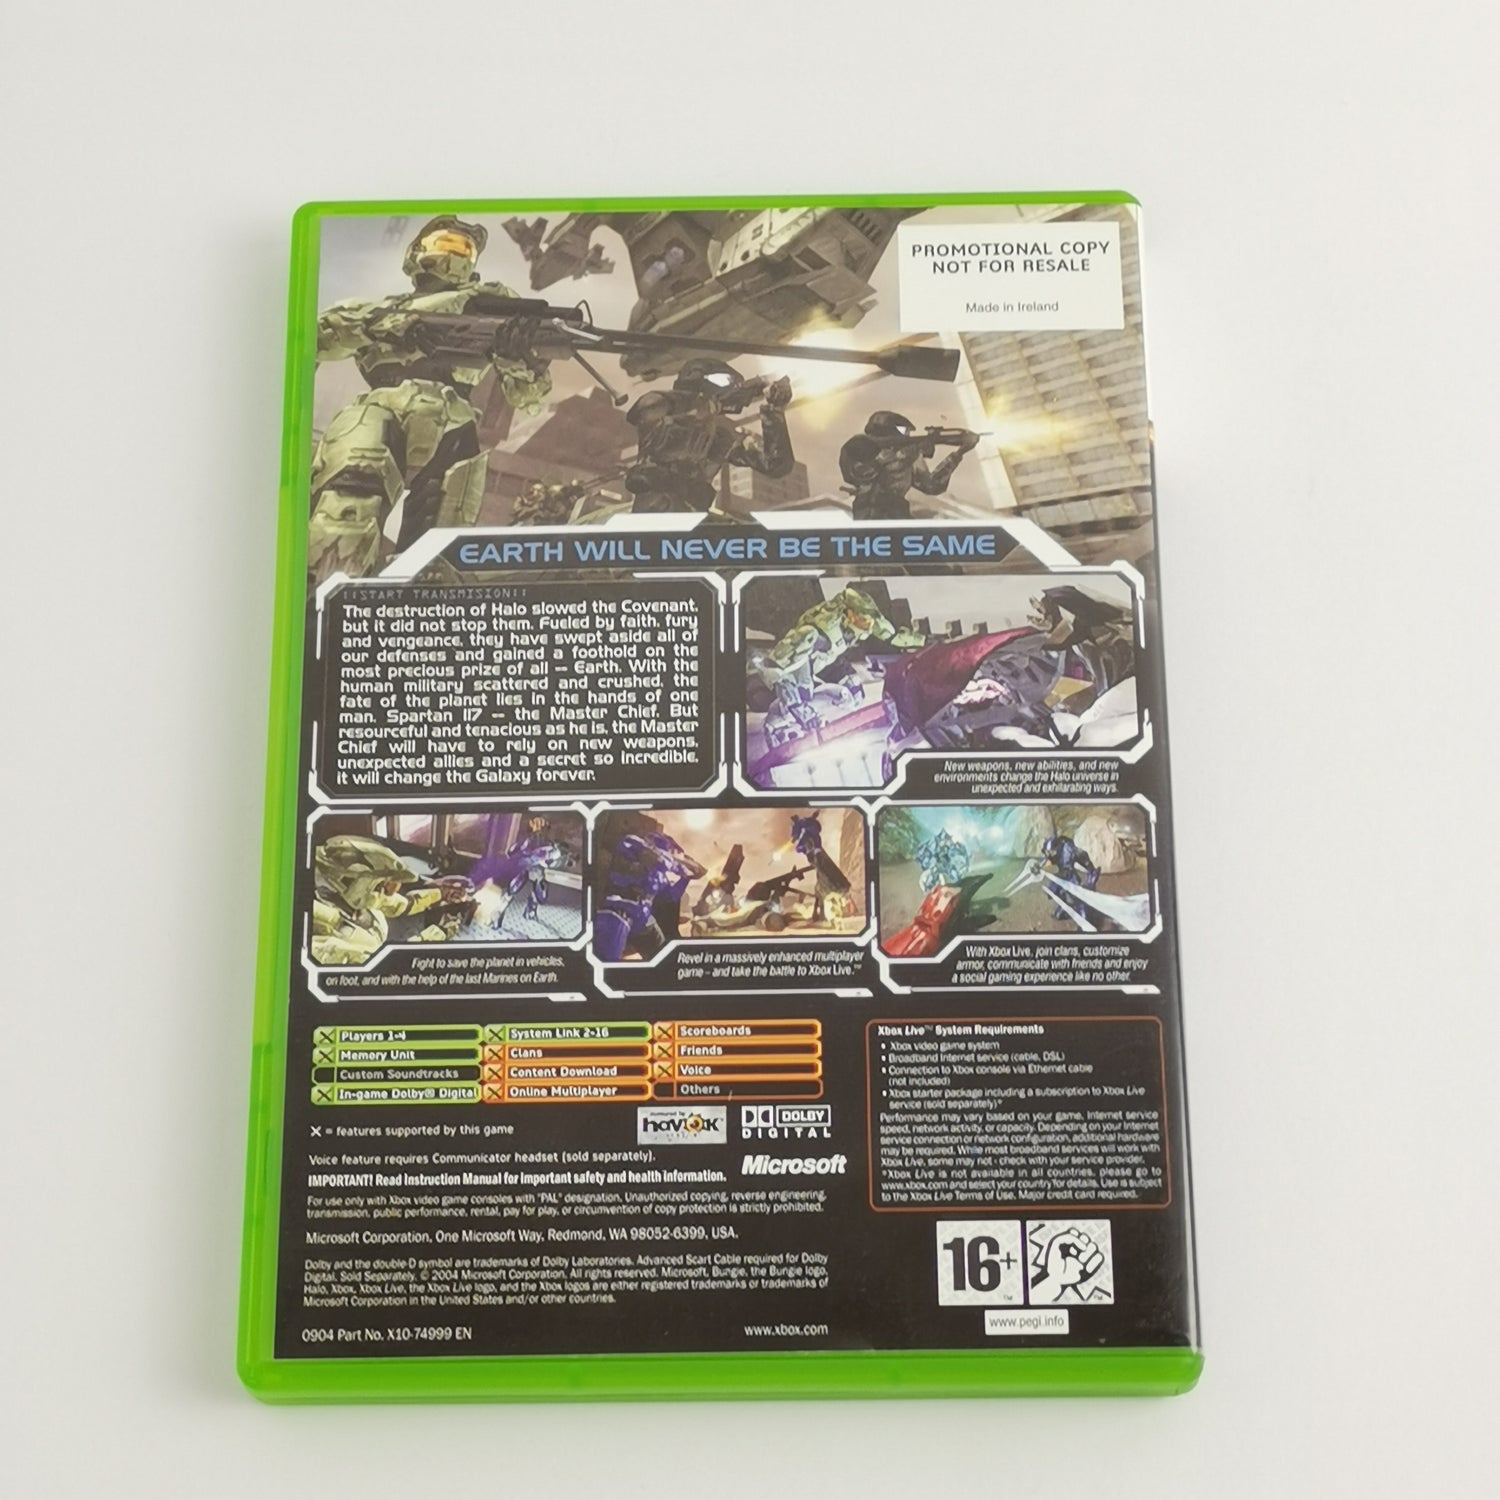 Microsoft Xbox Classic Game : Halo Promotional Copy- Not For Resale | Promo original packaging